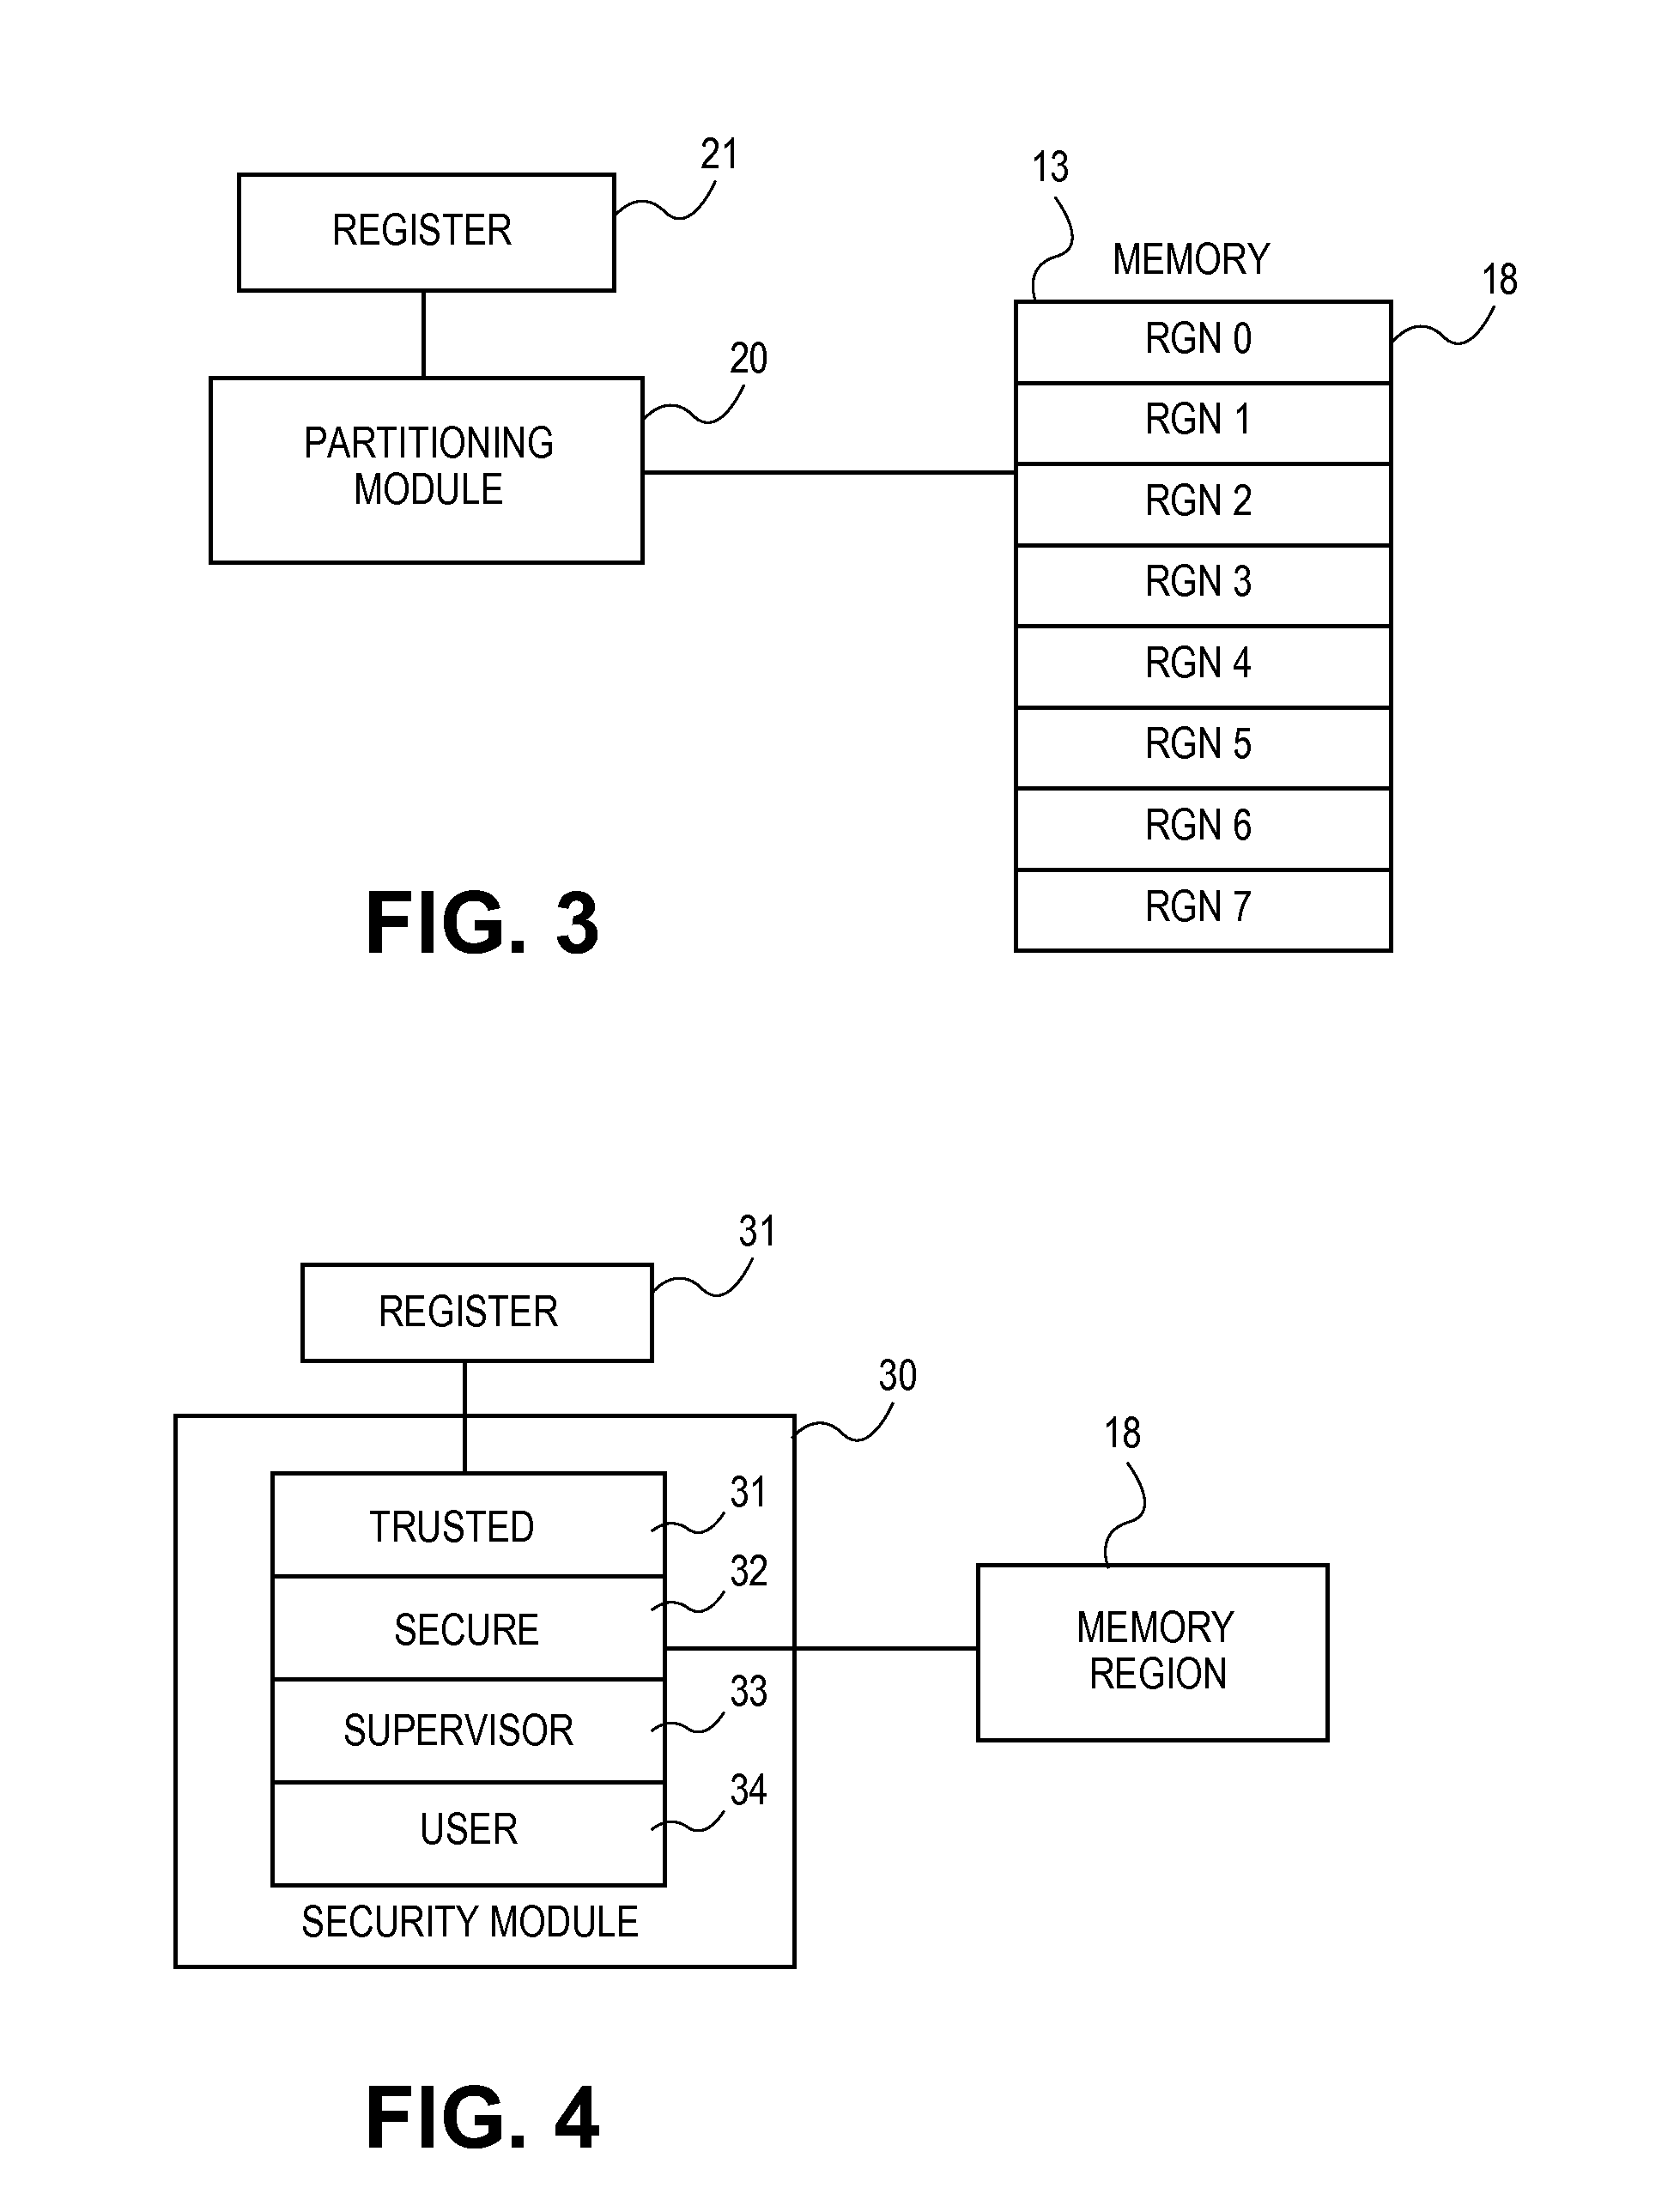 Apparatus and method for partitioning, sandboxing and protecting external memories